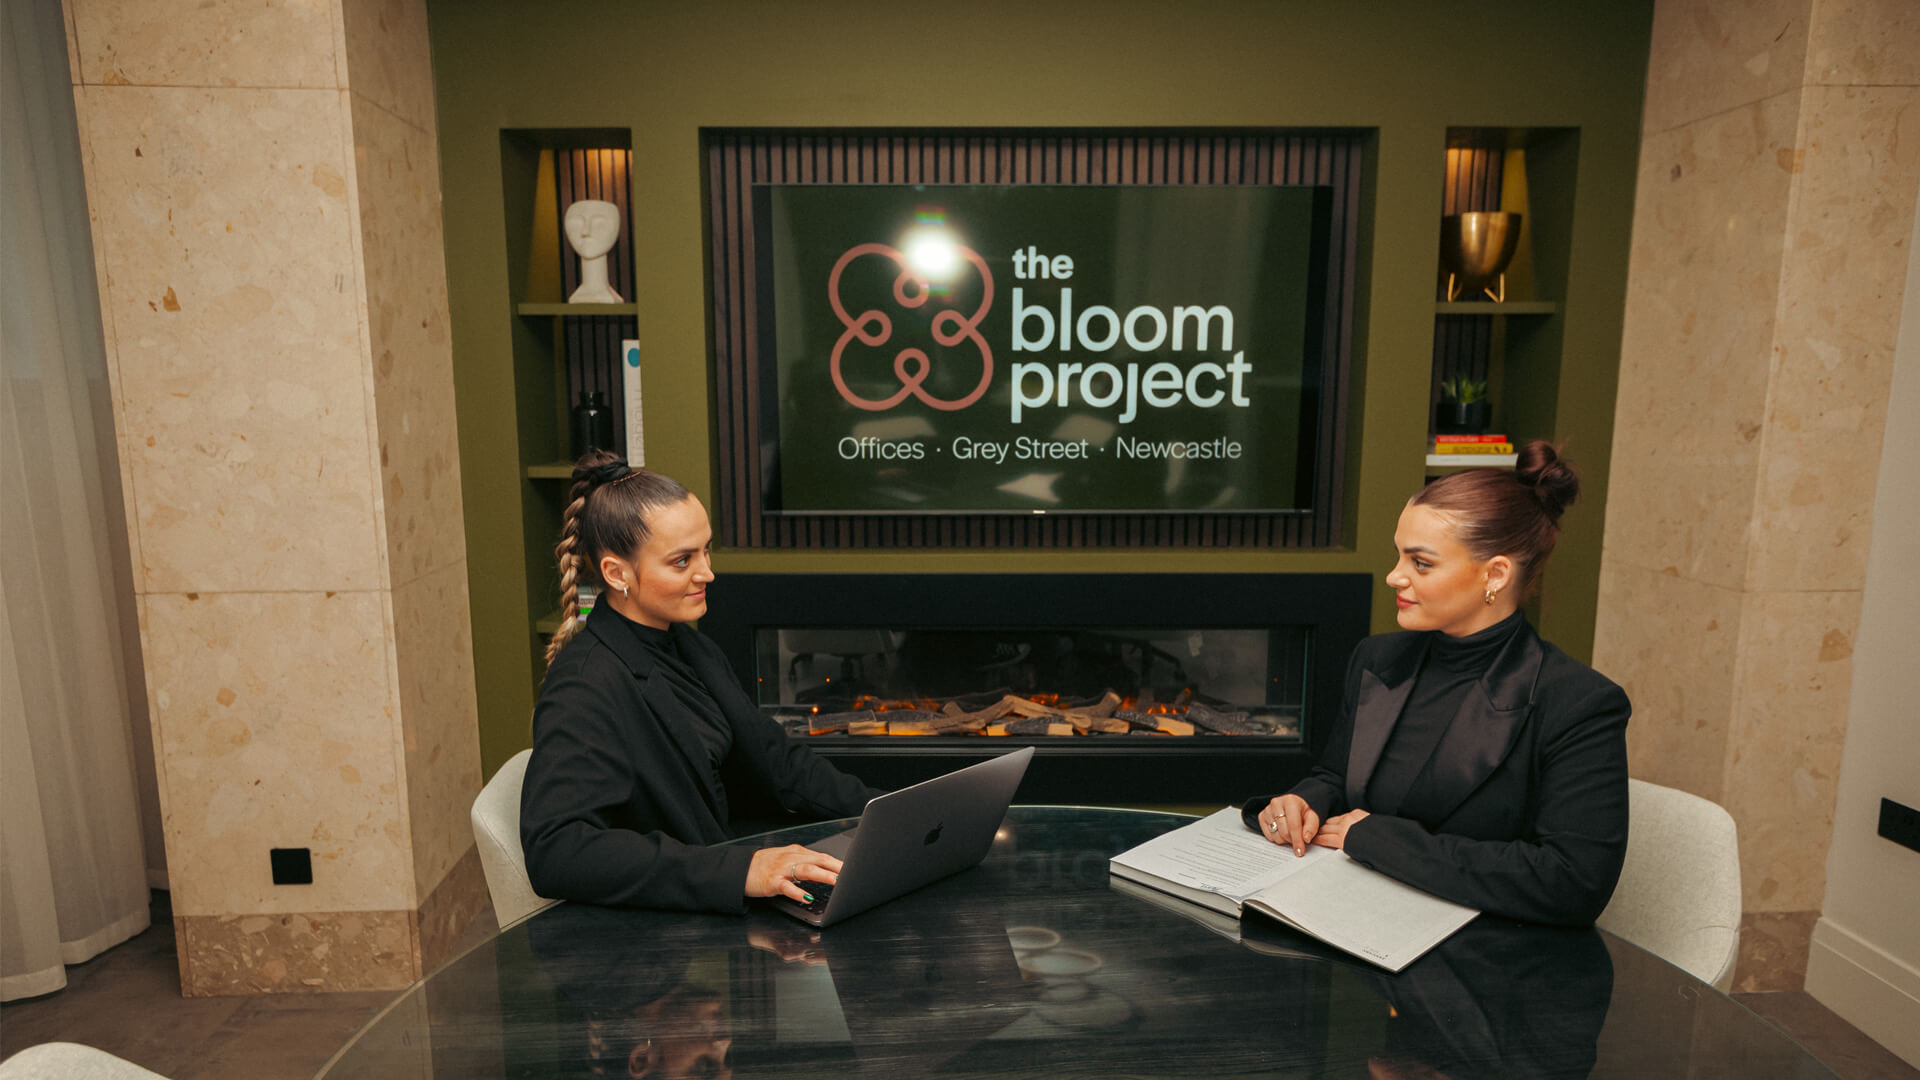 The Bloom Project – The Bloom Room